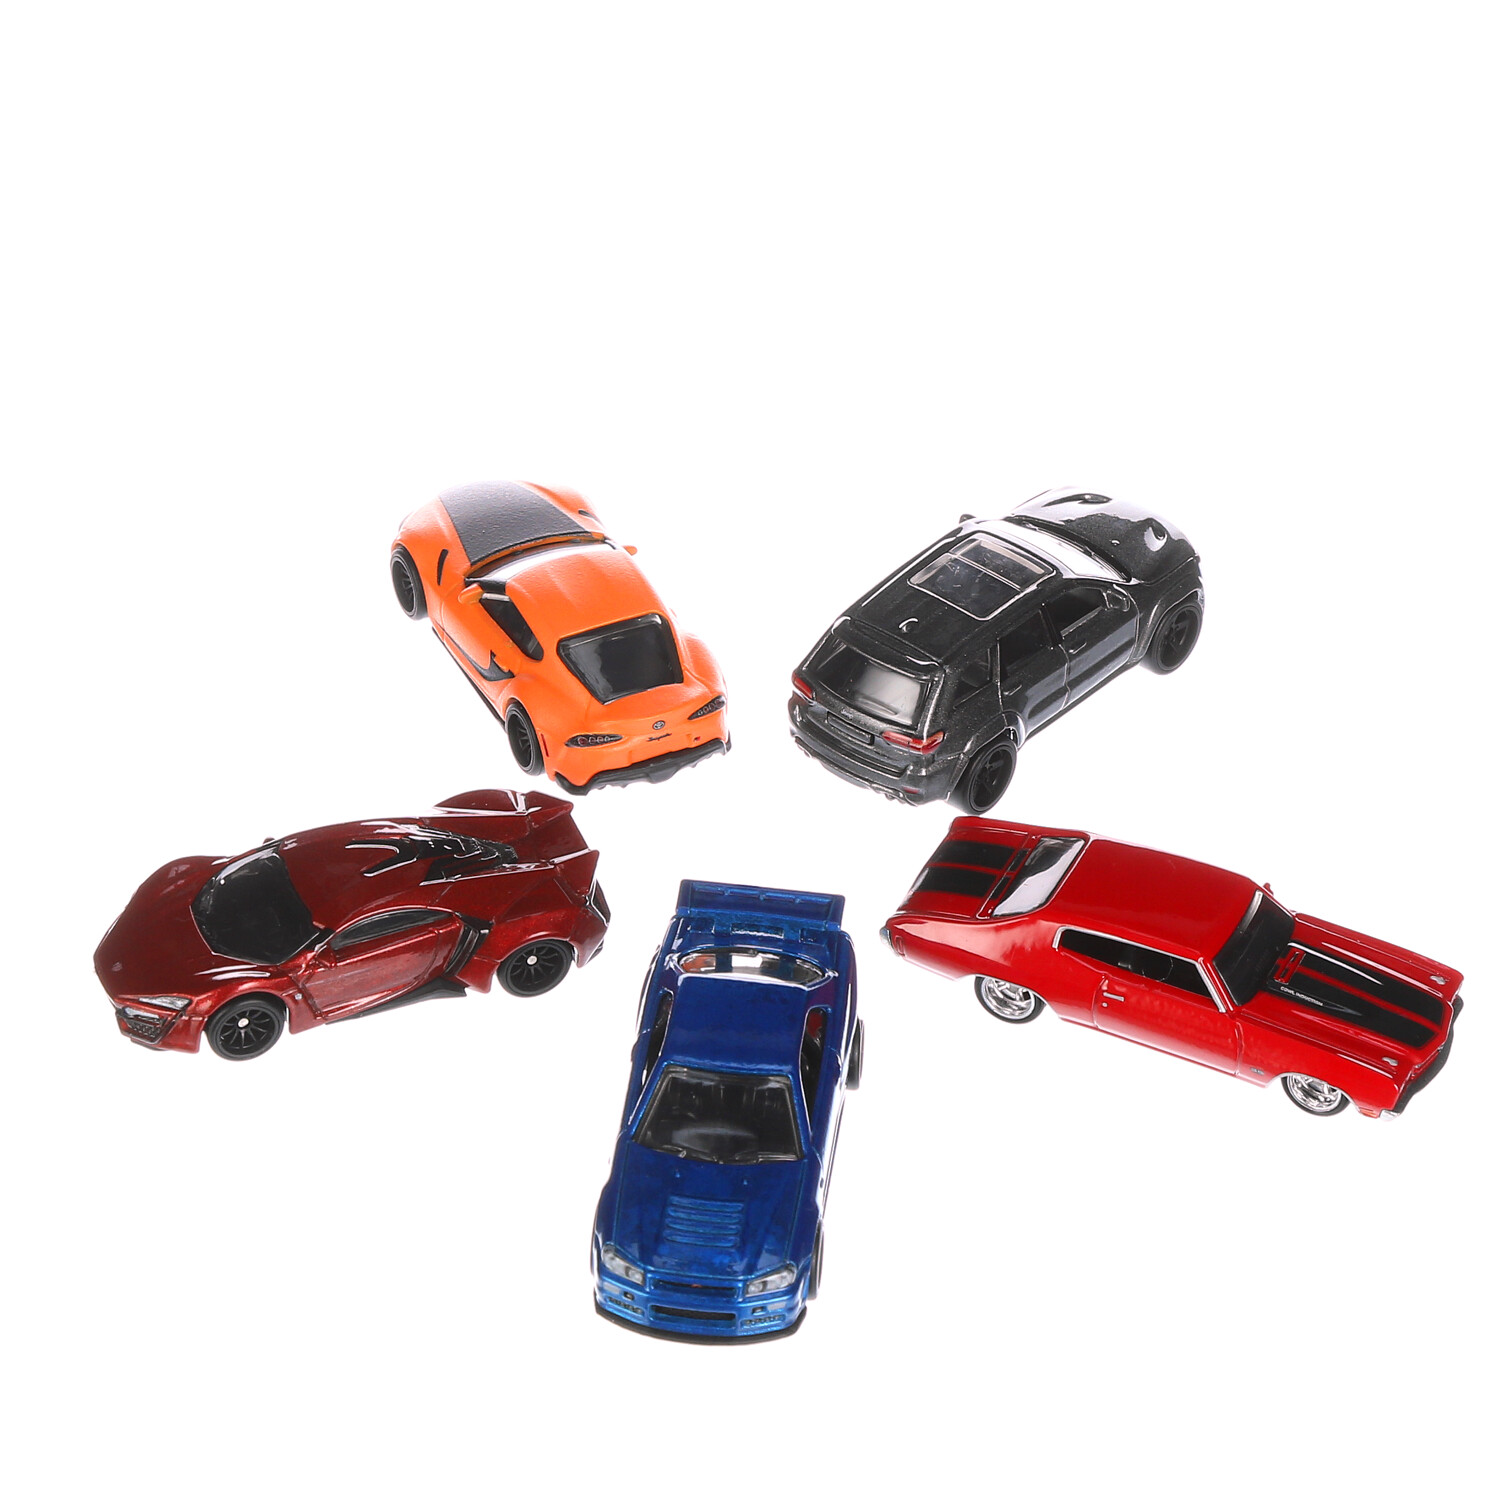 NEW HOT WHEELS FAST & FURIOUS FULL FORCE SET 5 ALL METAL VEHICLES UNOPENED  RARE